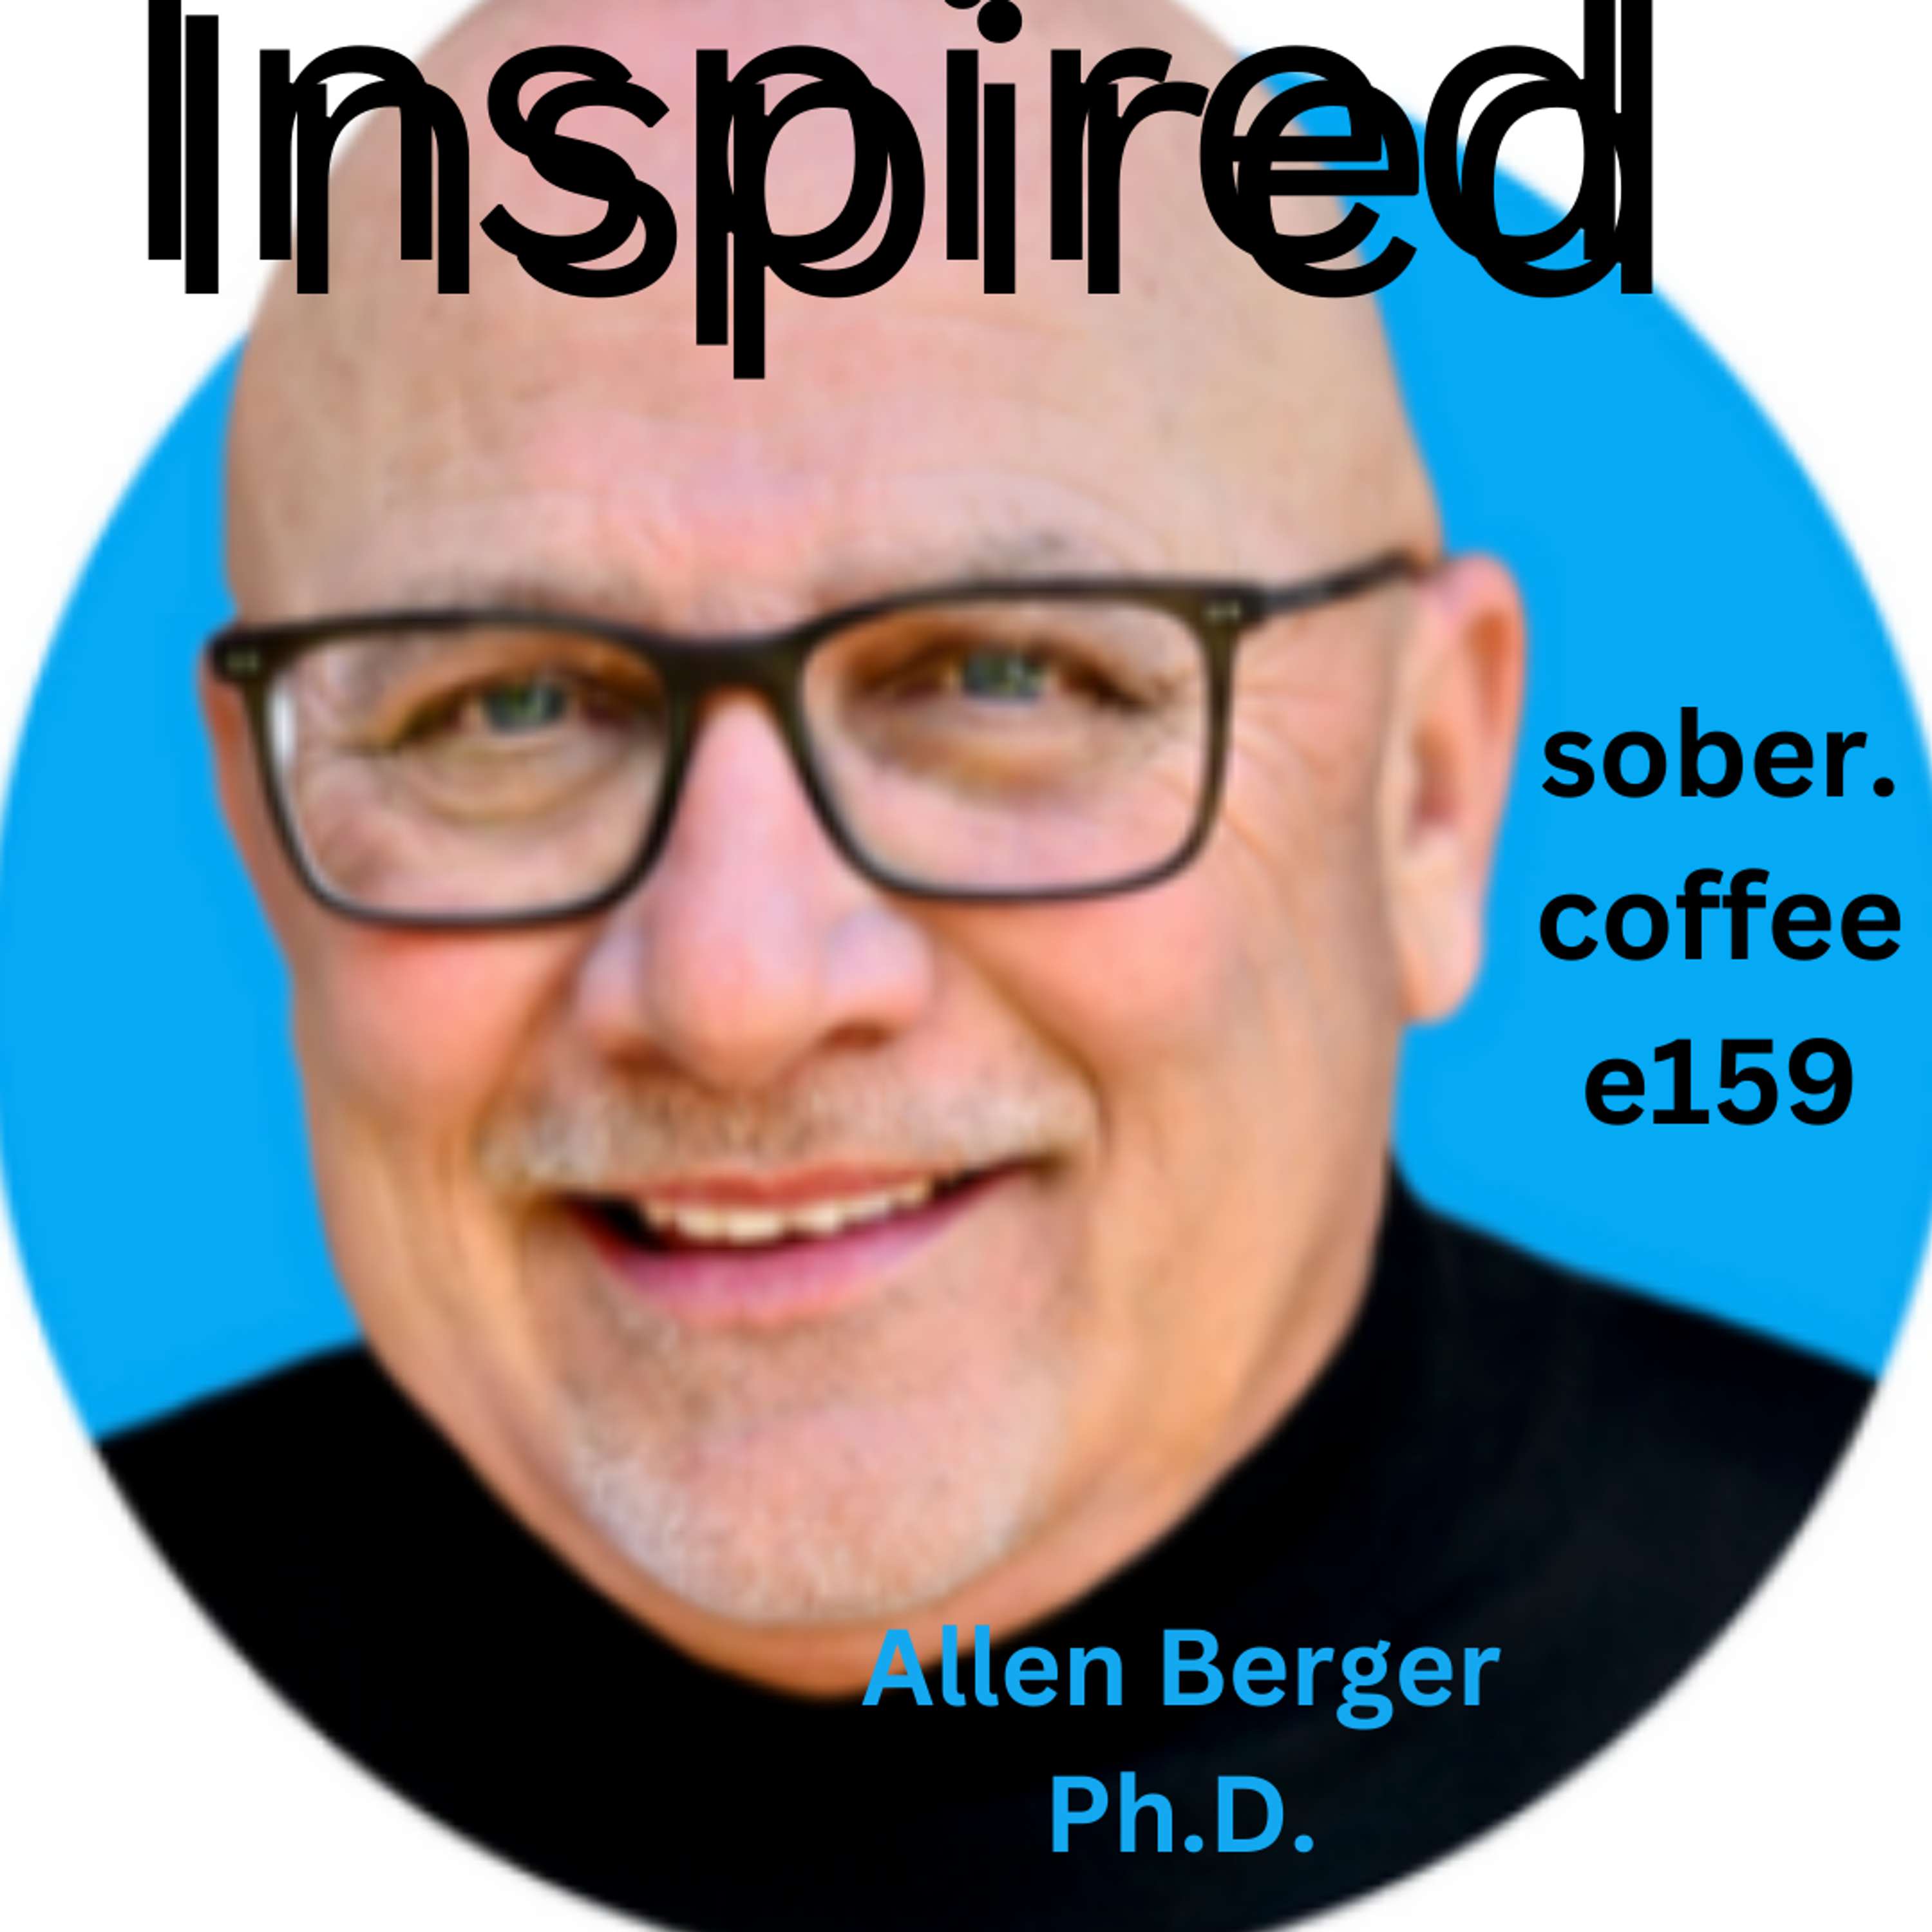 Inspired: Time with Allen Berger, Ph.D. Part 2